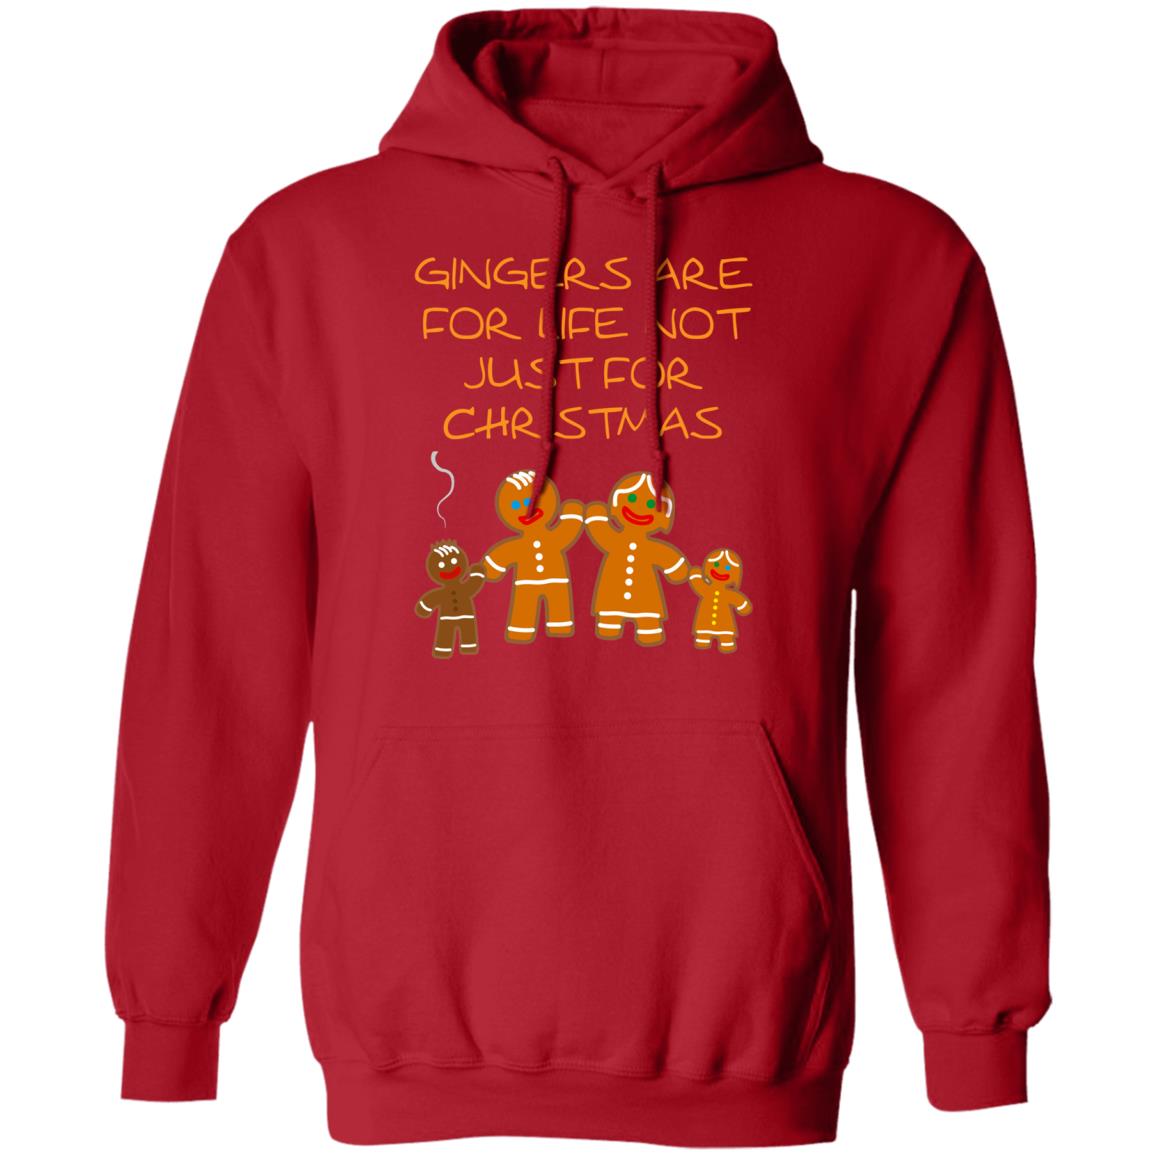 Gingers are for life not just for christmas sweatshirt ls hoodie - Q ...